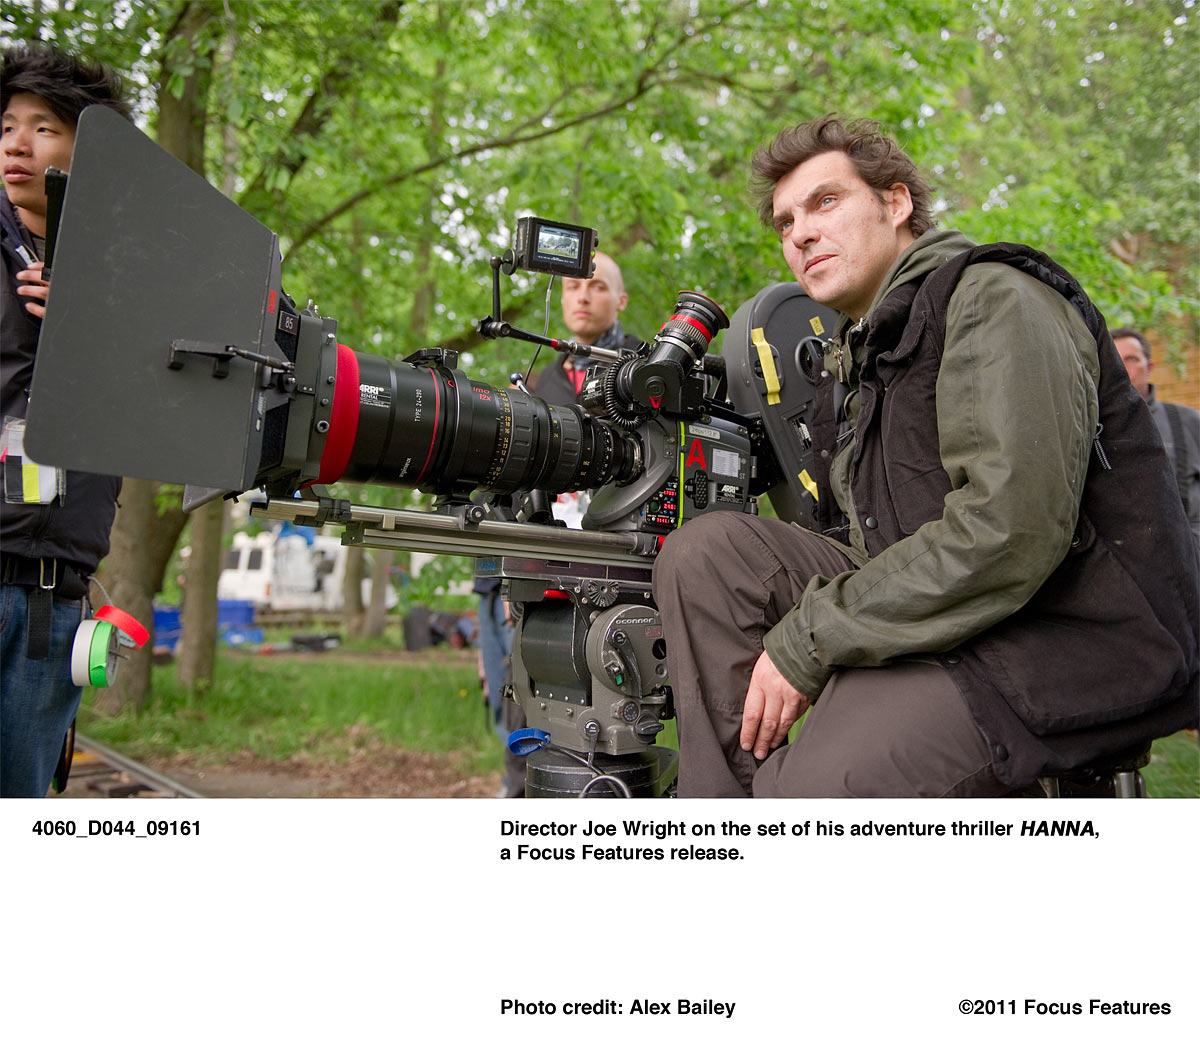 Director Joe Wright on the set of his adventure thriller HANNA, a Focus Features release. Photo credit: Alex Bailey.